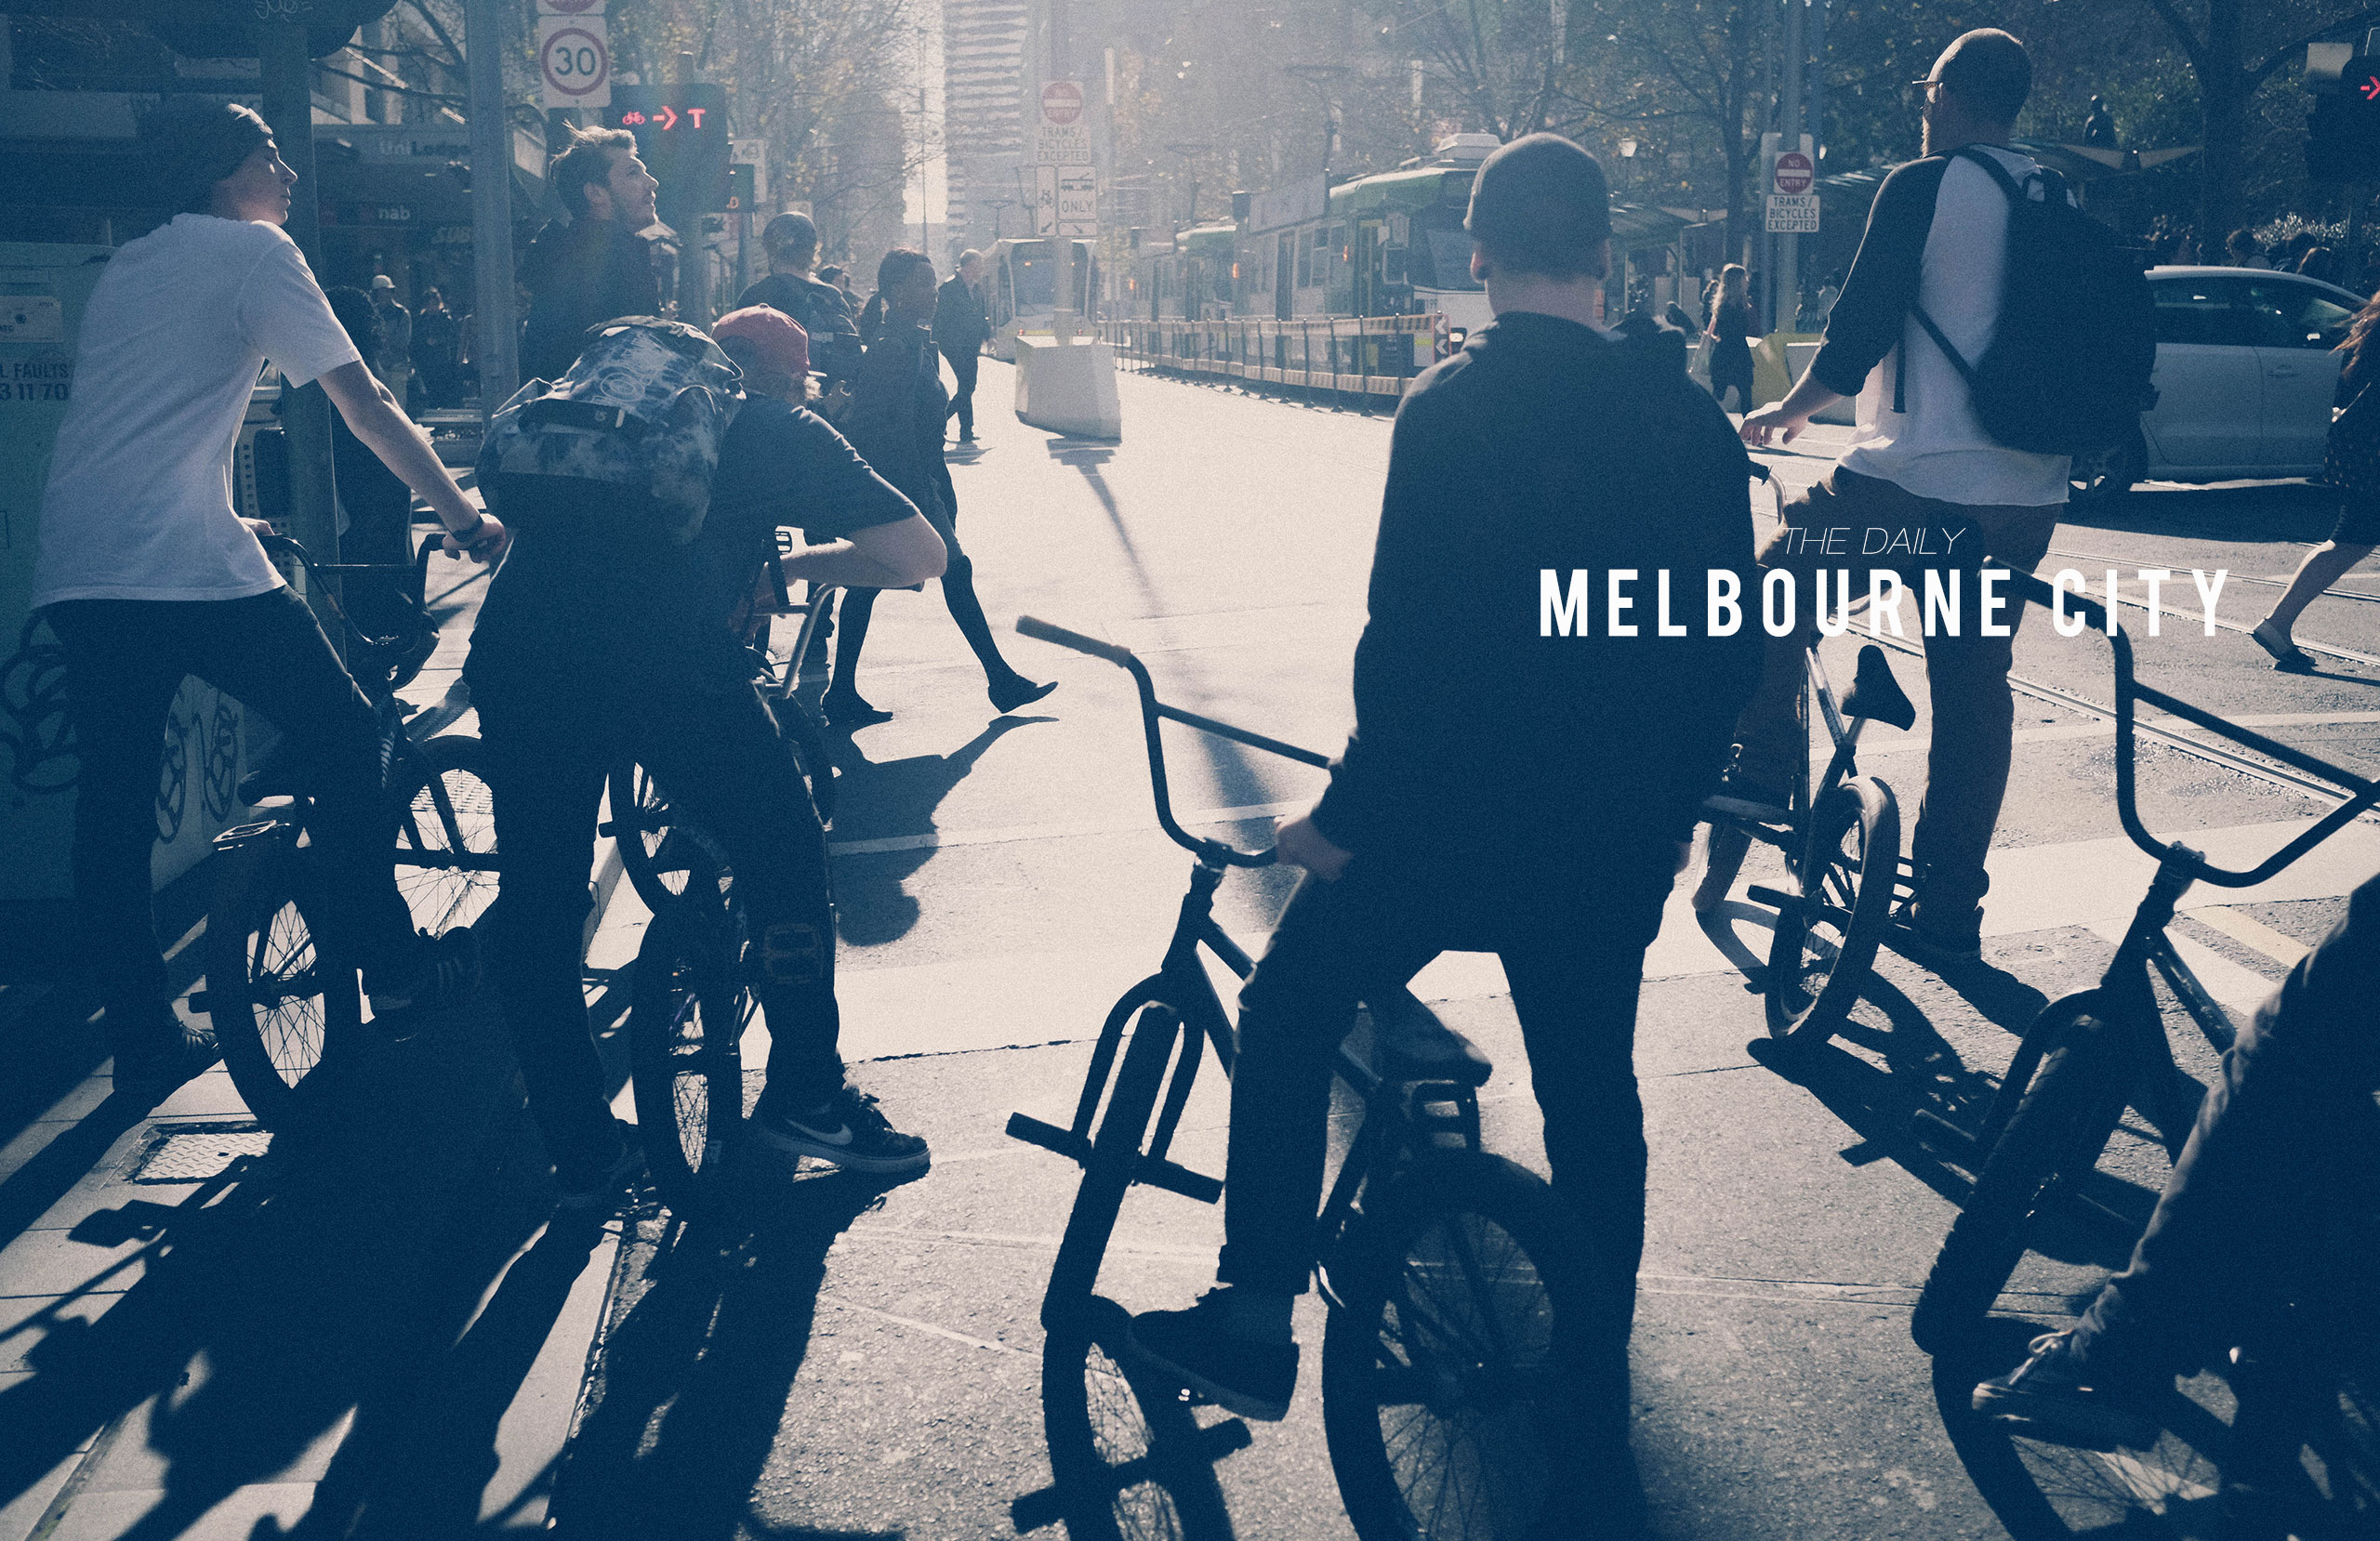 The Daily – Melbourne City